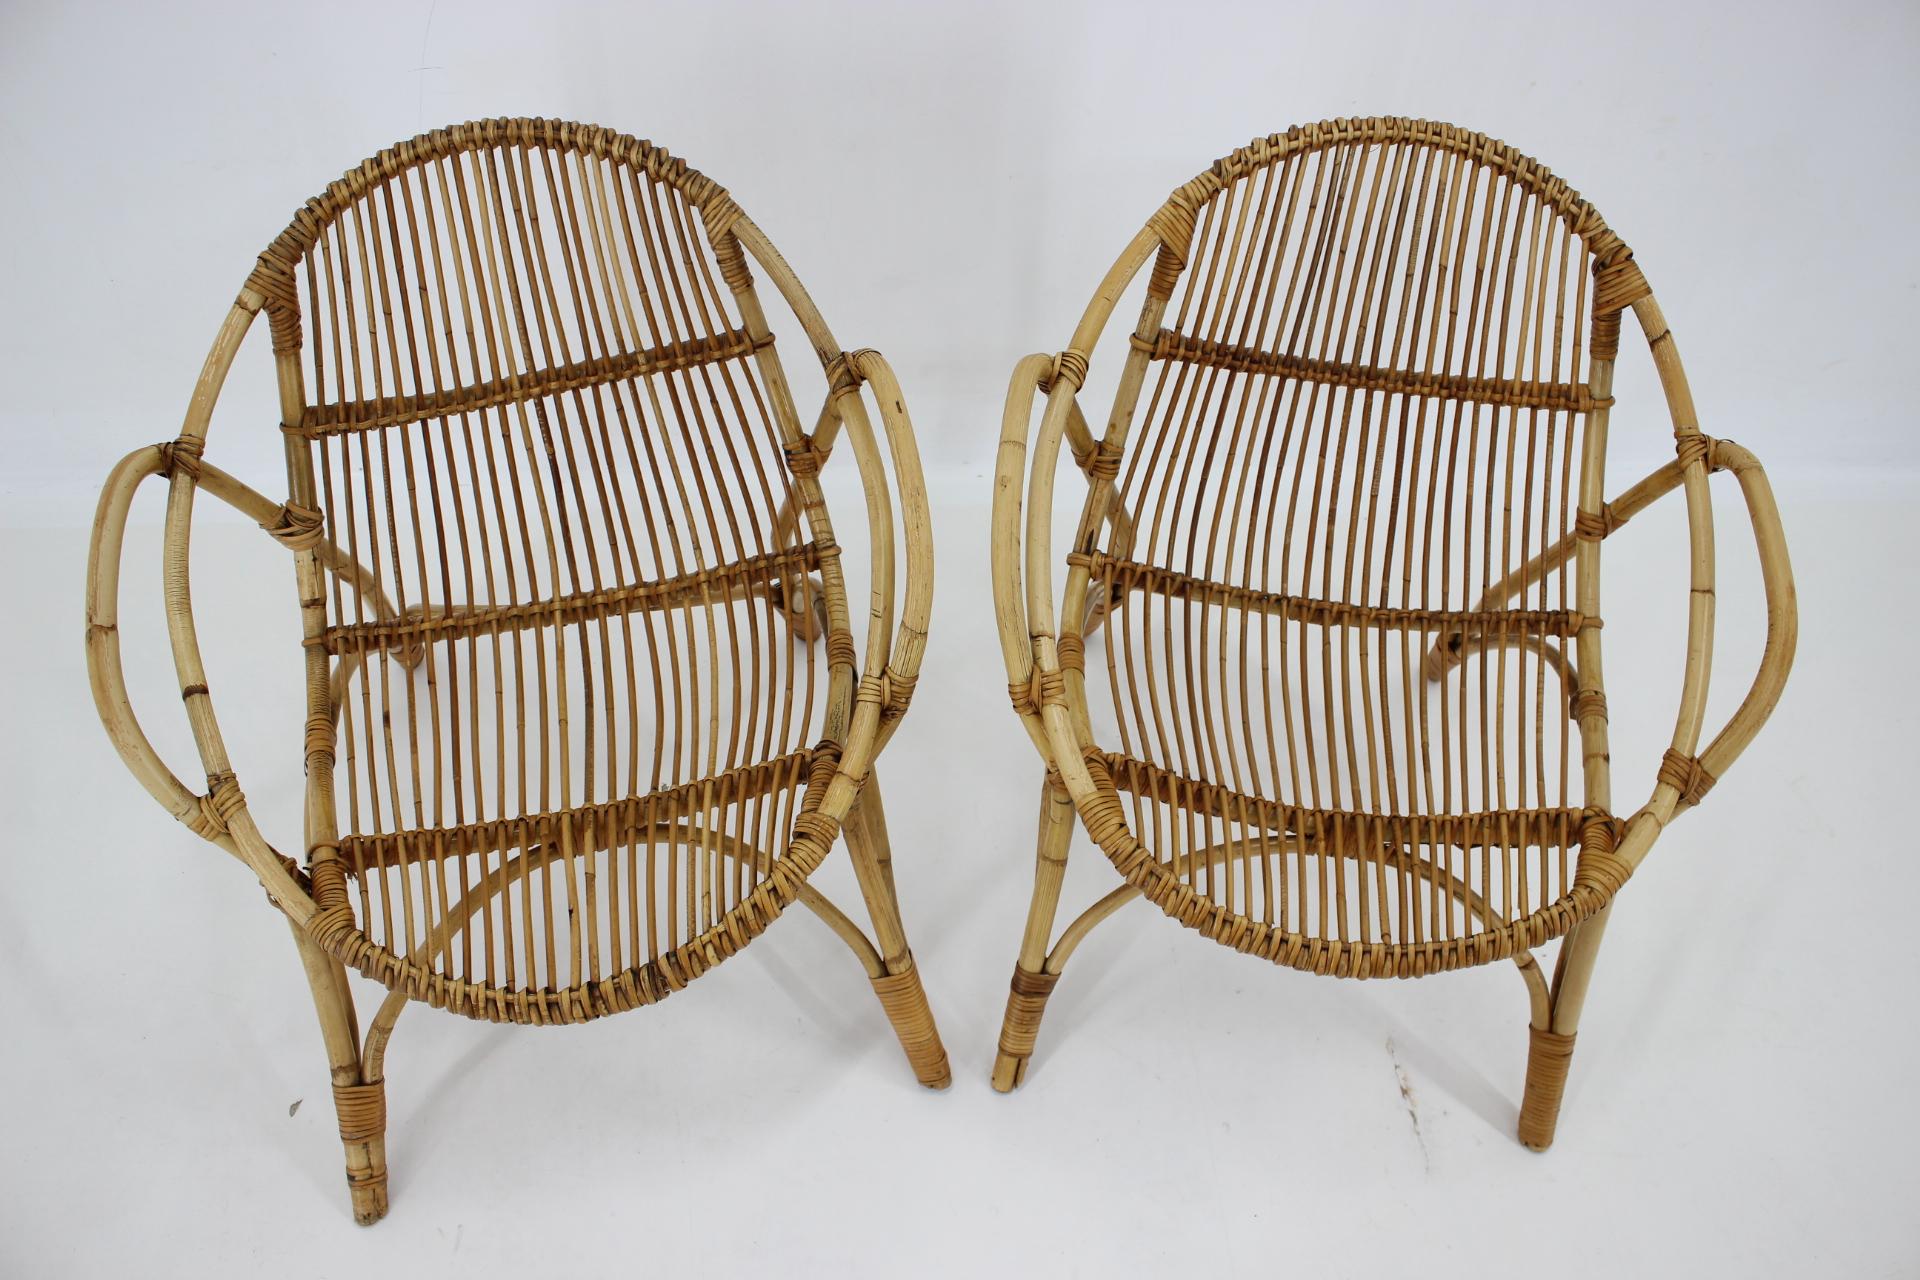 1960s Pair of Alan Fuchs Rattan Lounge Chairs and Coffee Table, Czechoslovakia For Sale 6